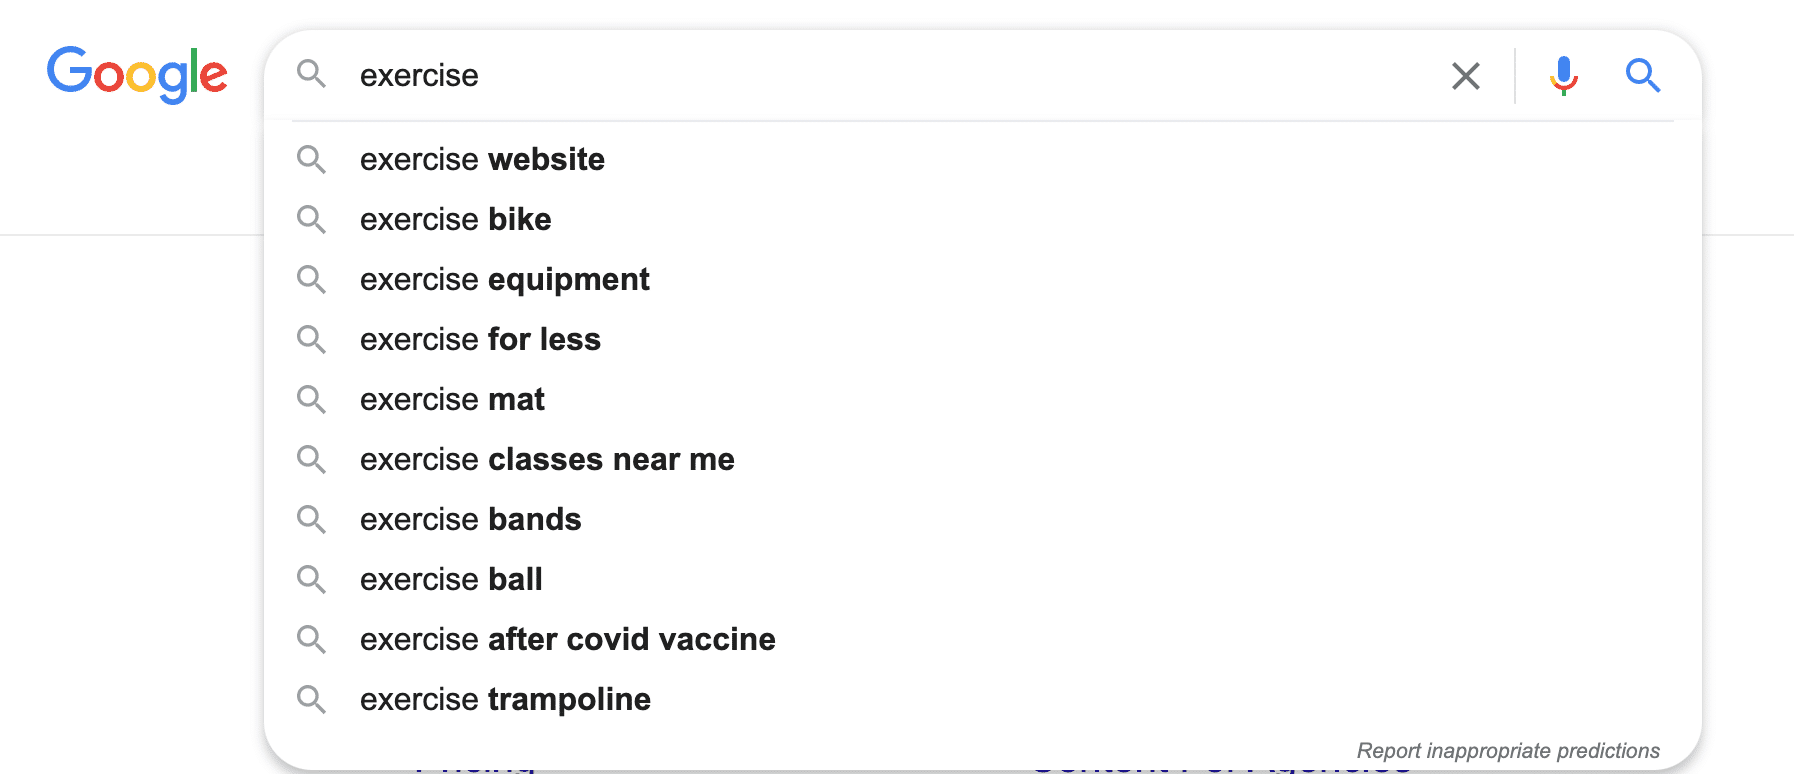 Google search exercise